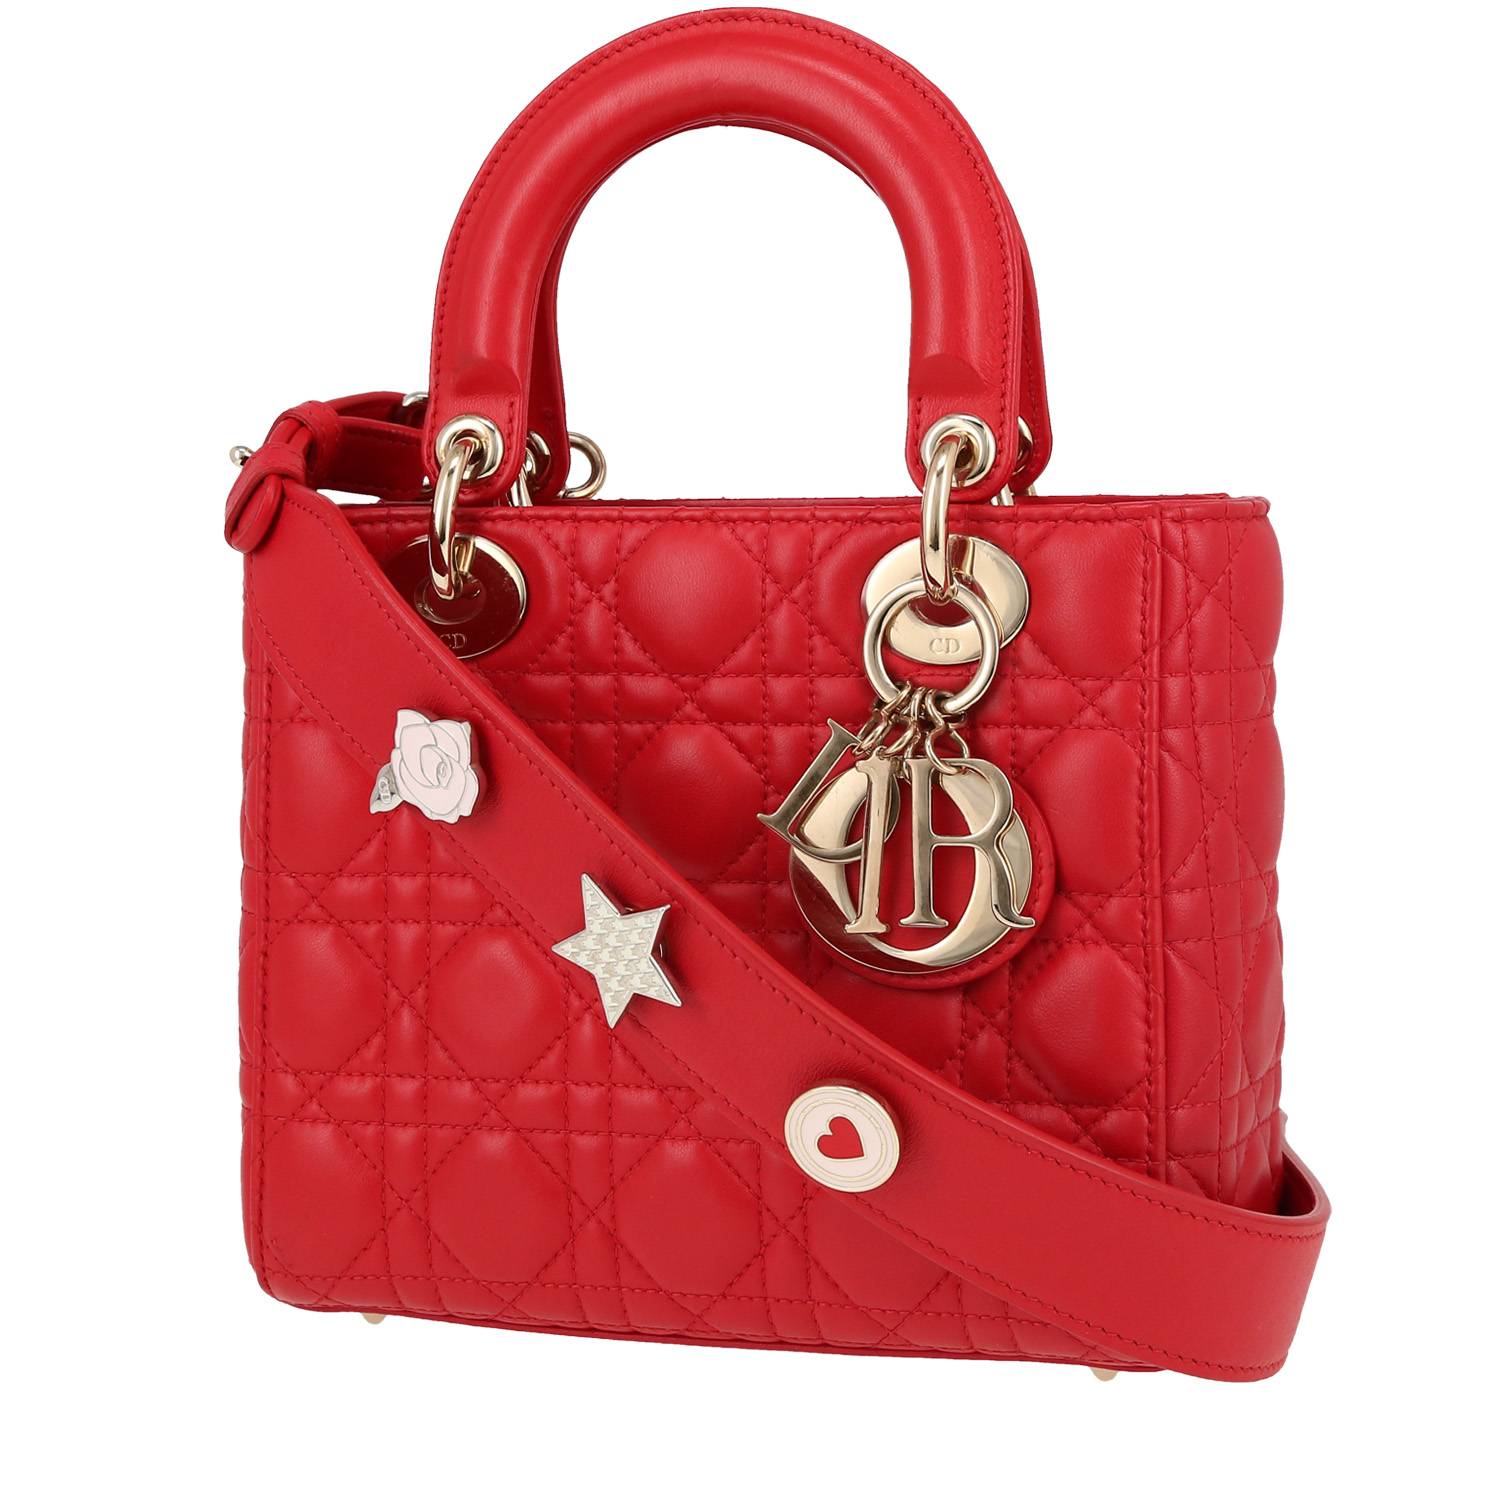 My Abcdior Small Model Handbag In Leather Cannage